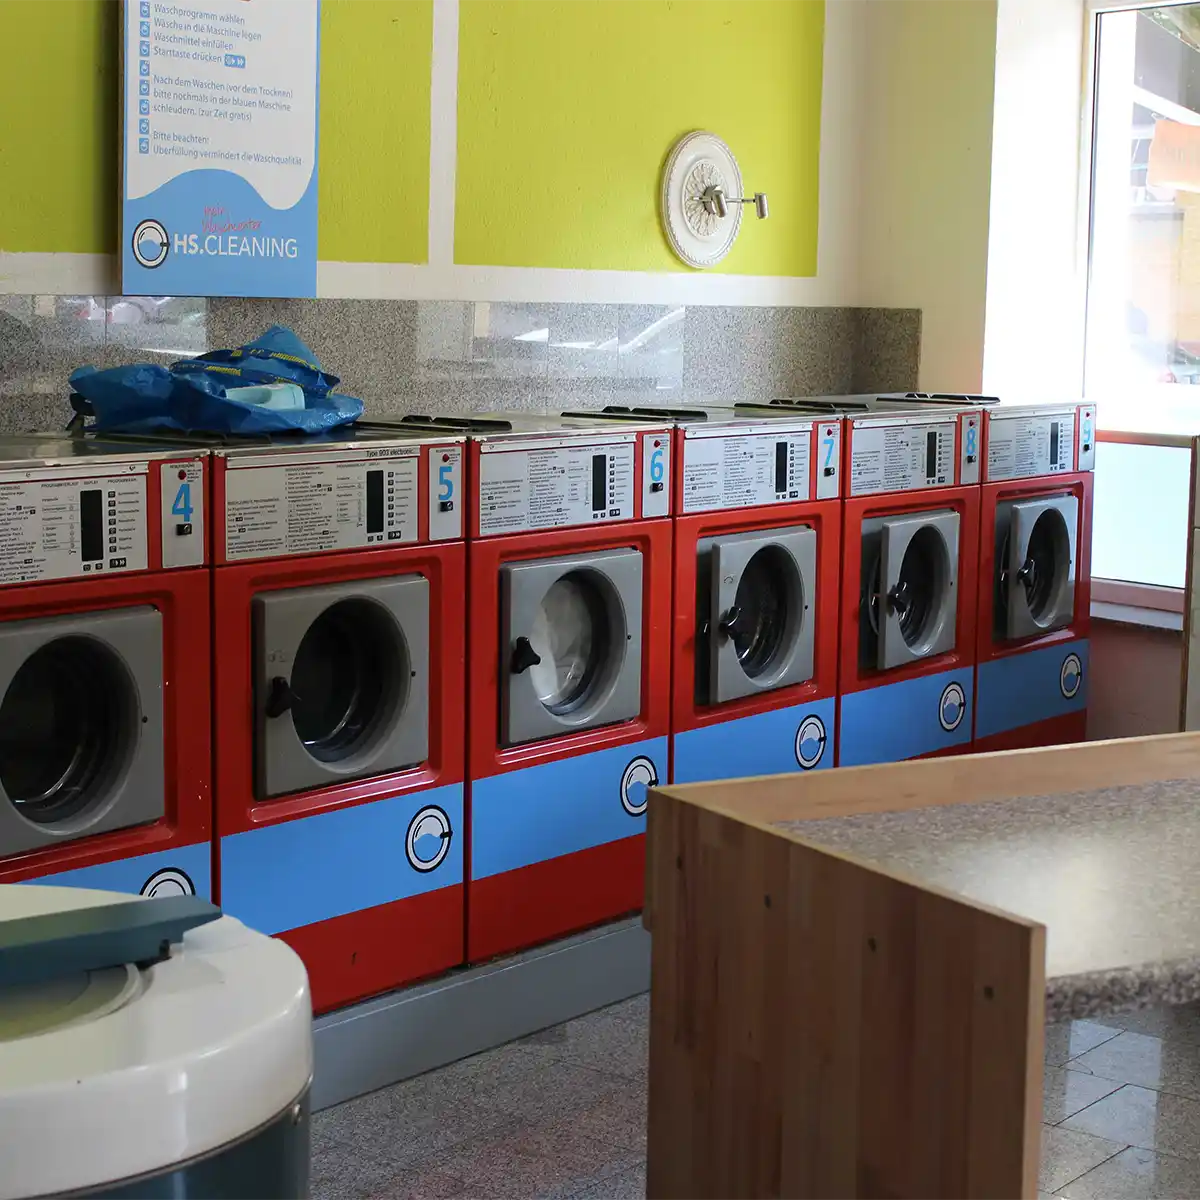 A row of washing machines with a red housing